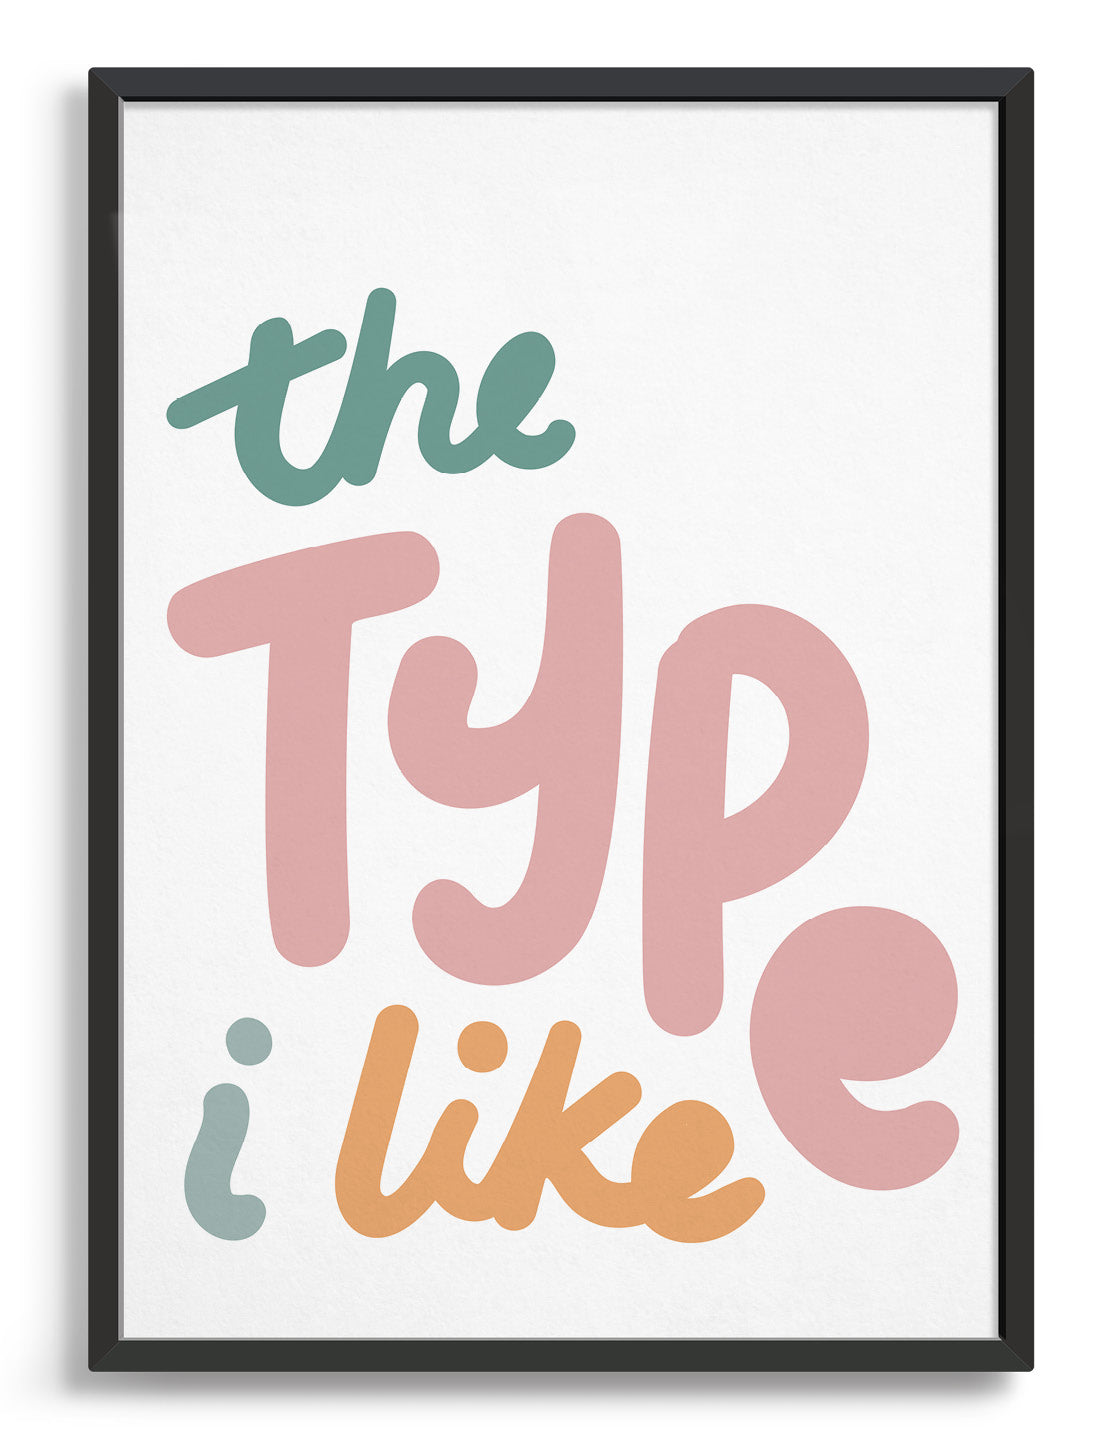 Multi colour text typography print on white background 'The type i like'